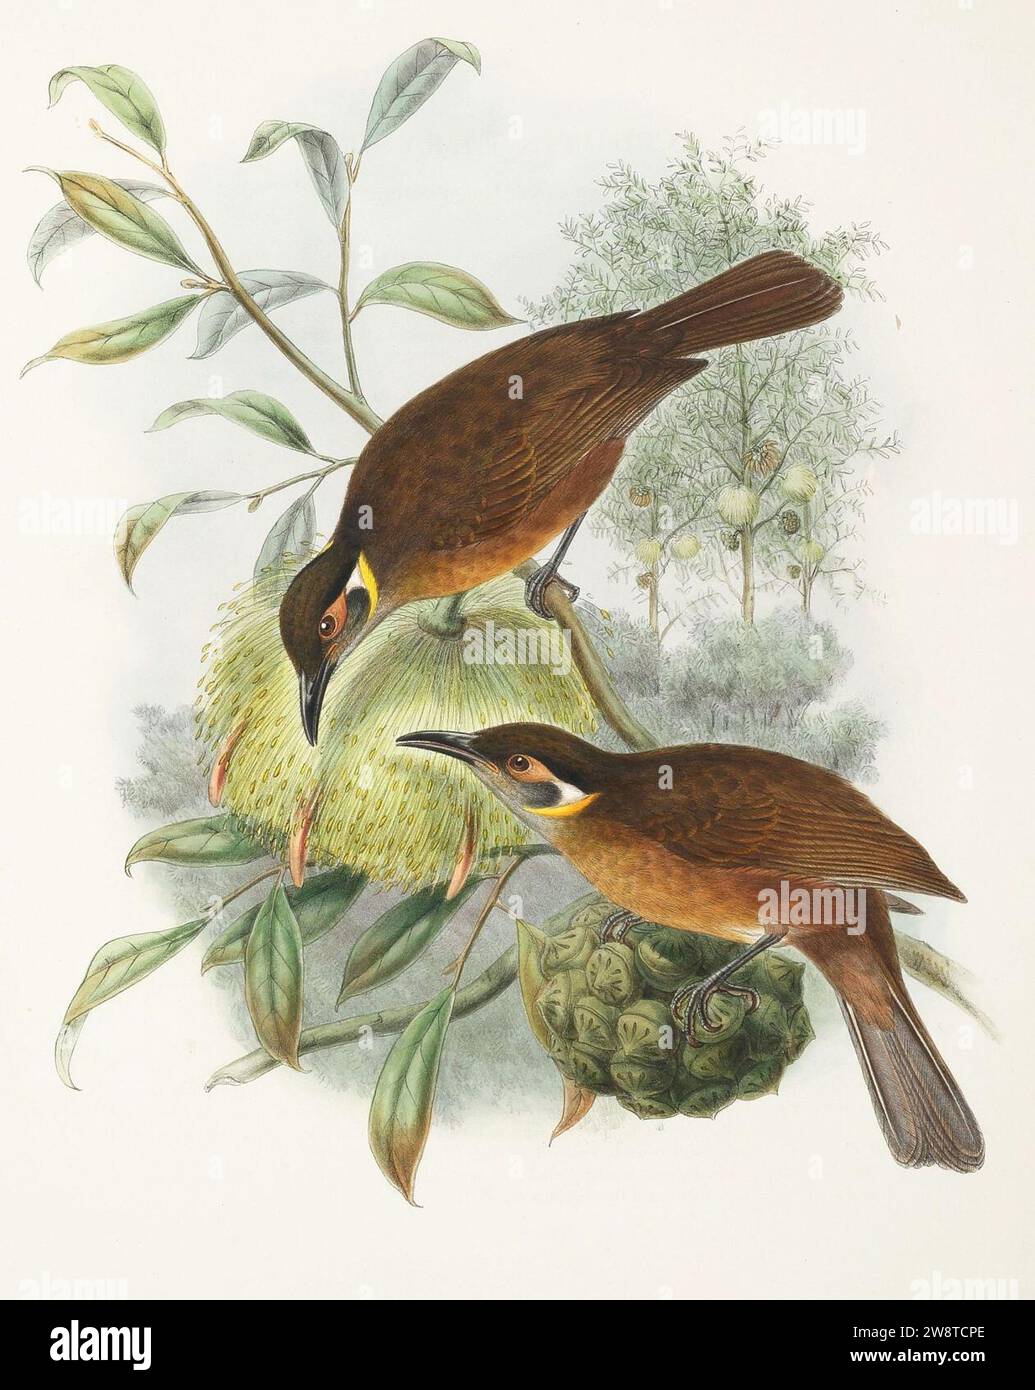 Xanthotis flaviventer - The Birds of New Guinea (cropped). Stock Photo